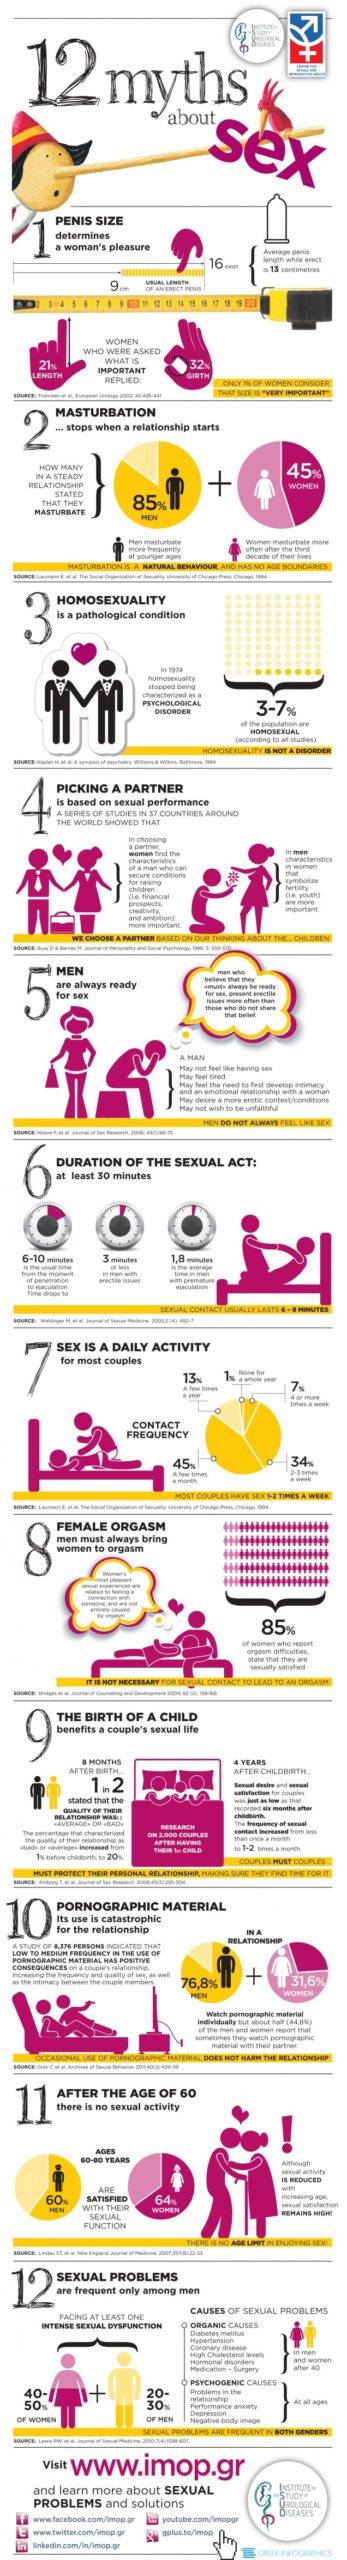 12 Myths About Sex You Need To Stop Believing [Infographic]